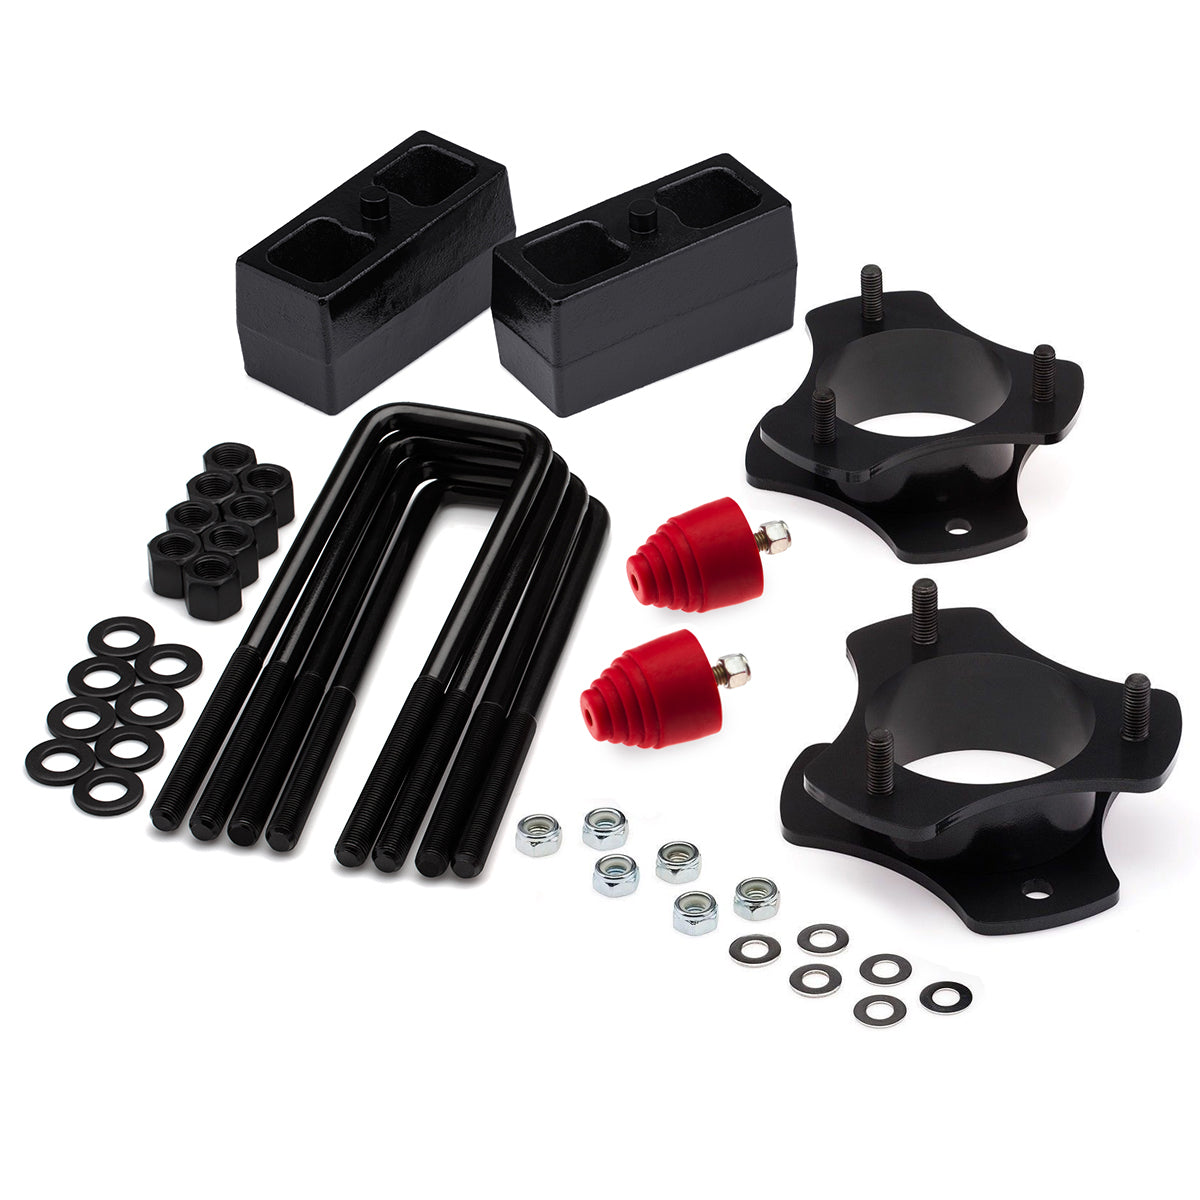 2004-2023 Nissan Titan 2WD 4WD Full Lift Kit with Bump Stops